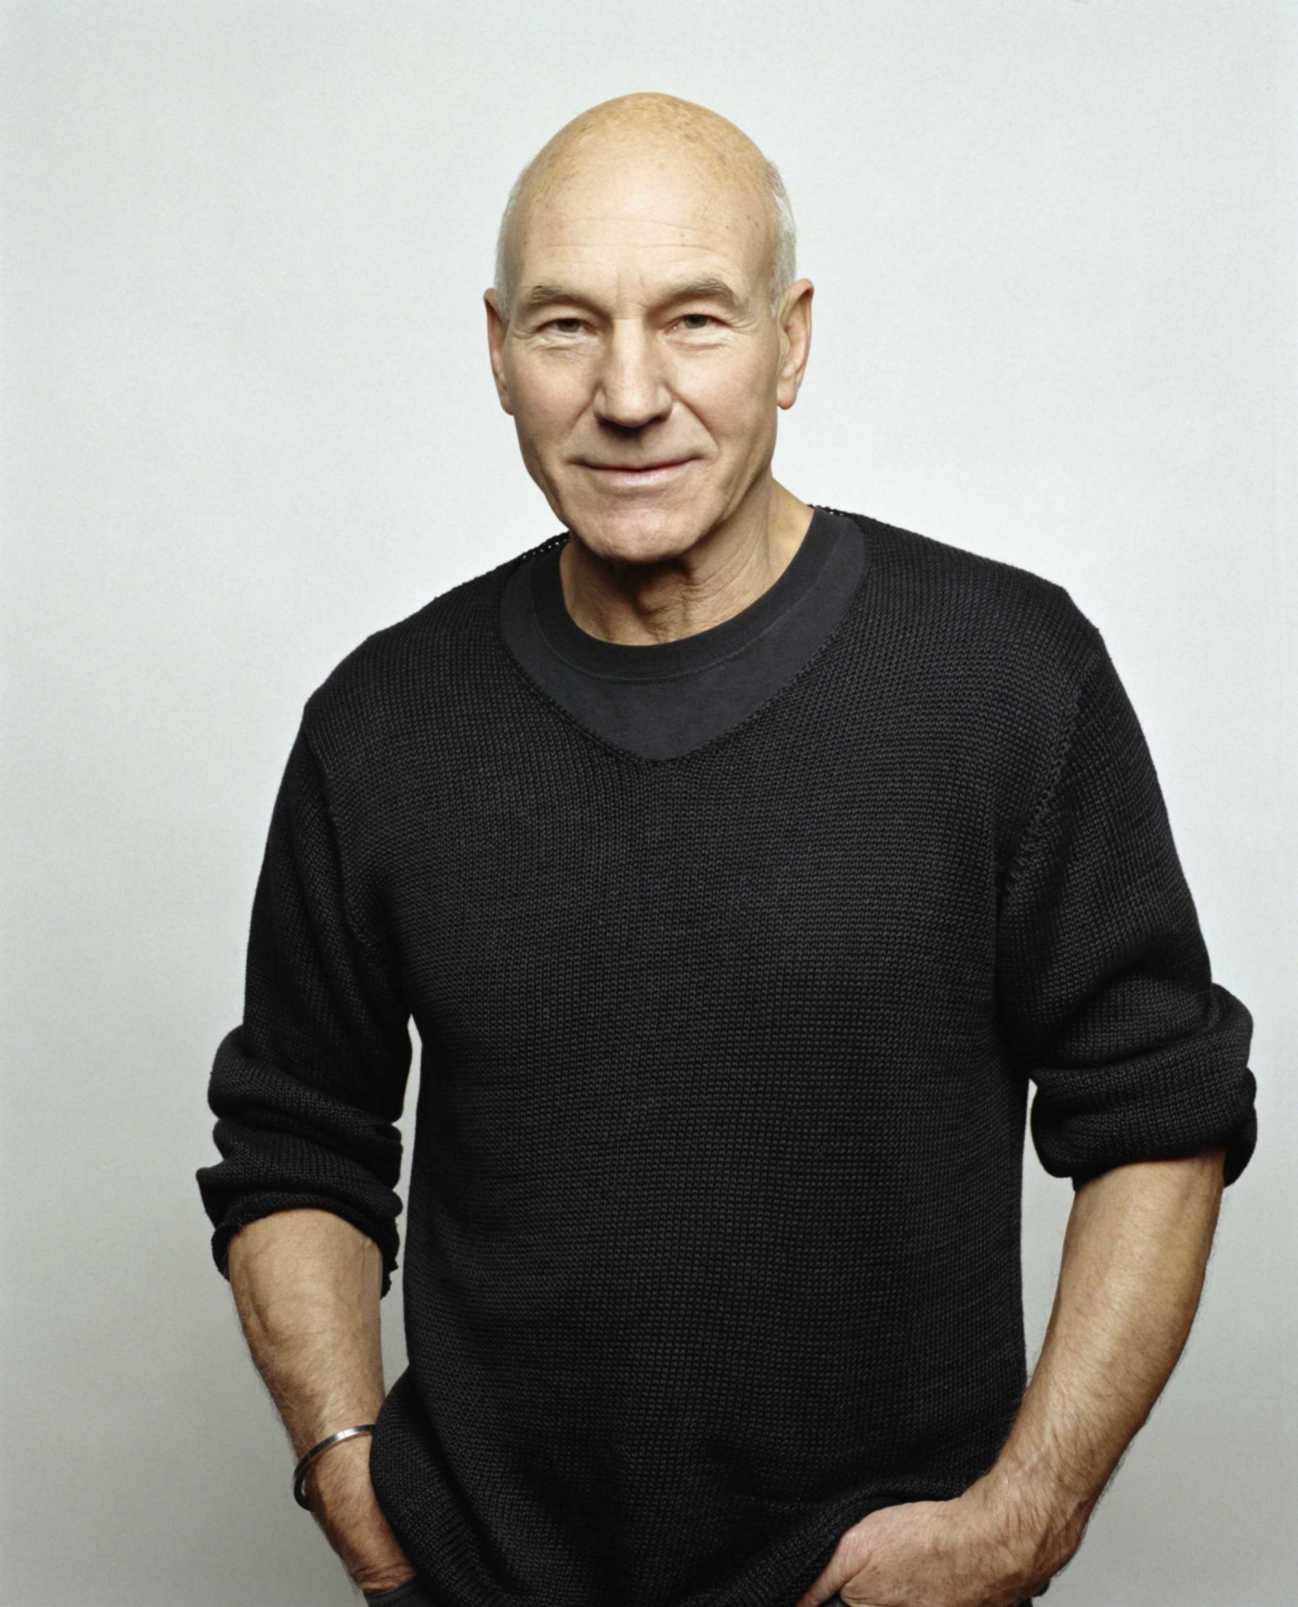 Acclaimed actor Patrick Stewart sporting a classic black knitted sweater Wallpaper